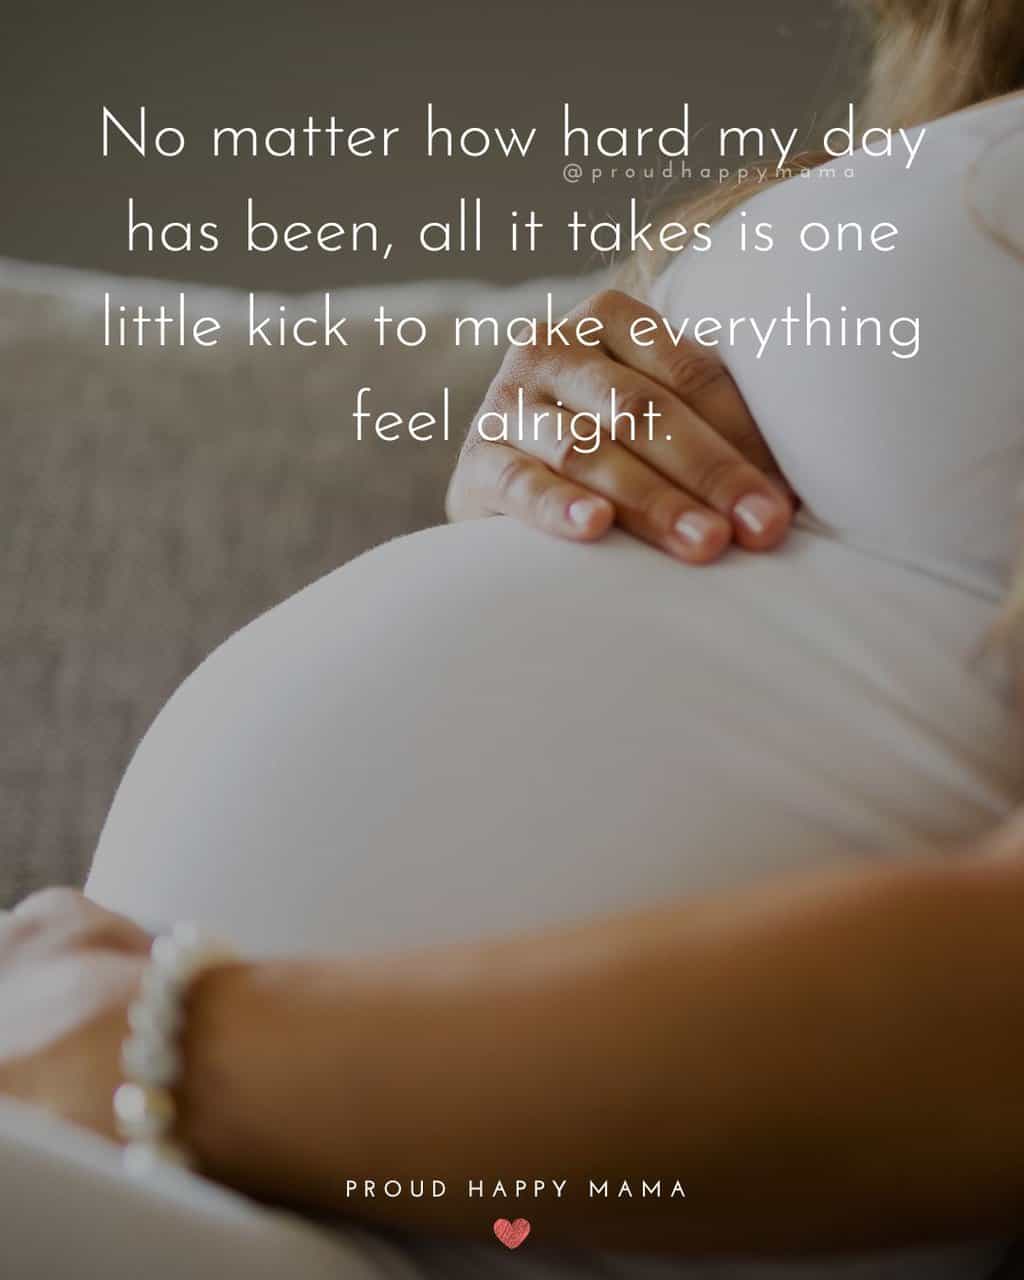 Pregnancy Motivational Quotes | No matter how hard my day has been, all it takes is one little kick to make everything feel alright.